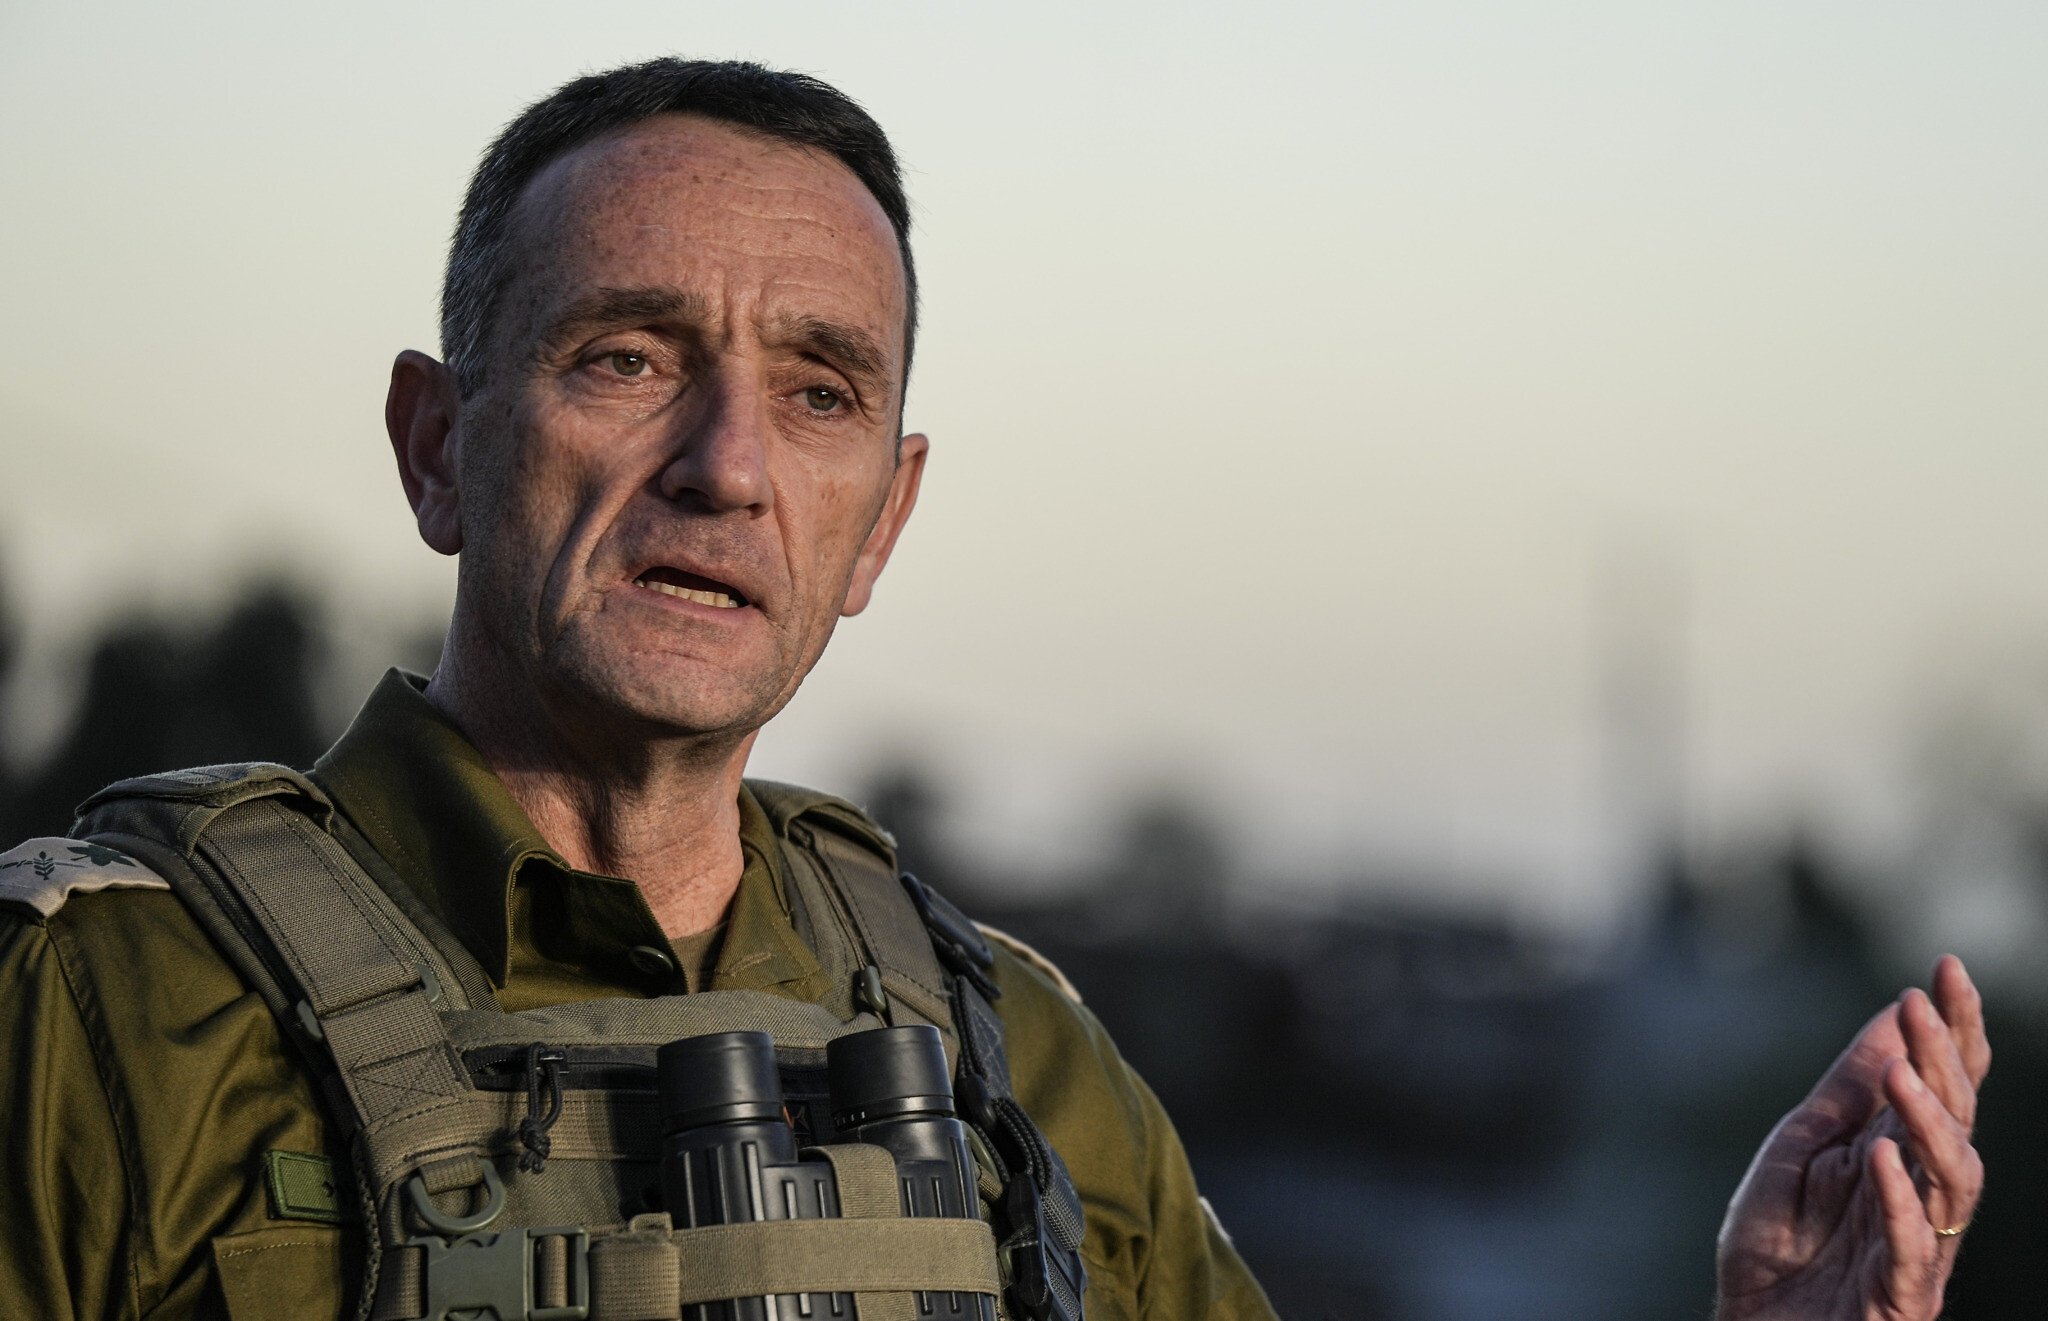 IDF chief in missive to soldiers: 'Unlike our enemy, we maintain our  humanity